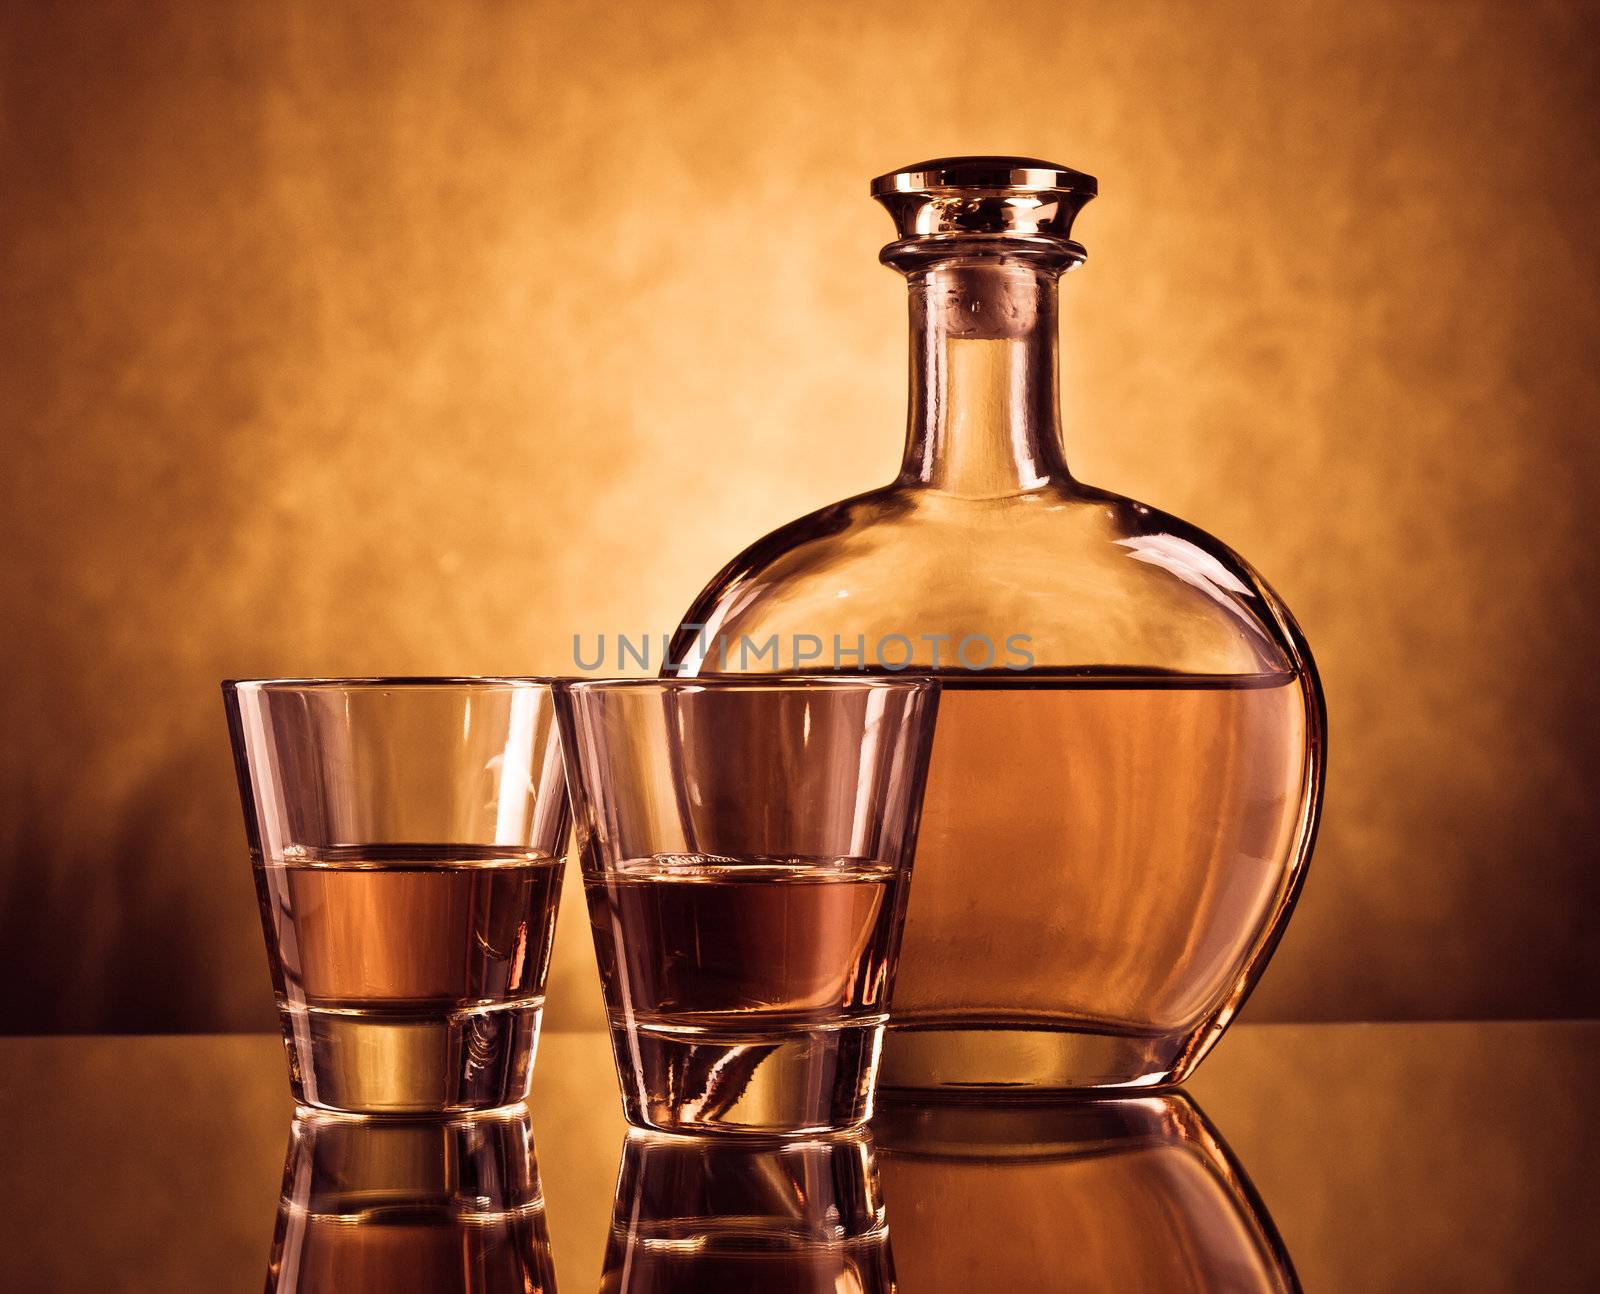 Elegant round bottle of alcohol with two glasses